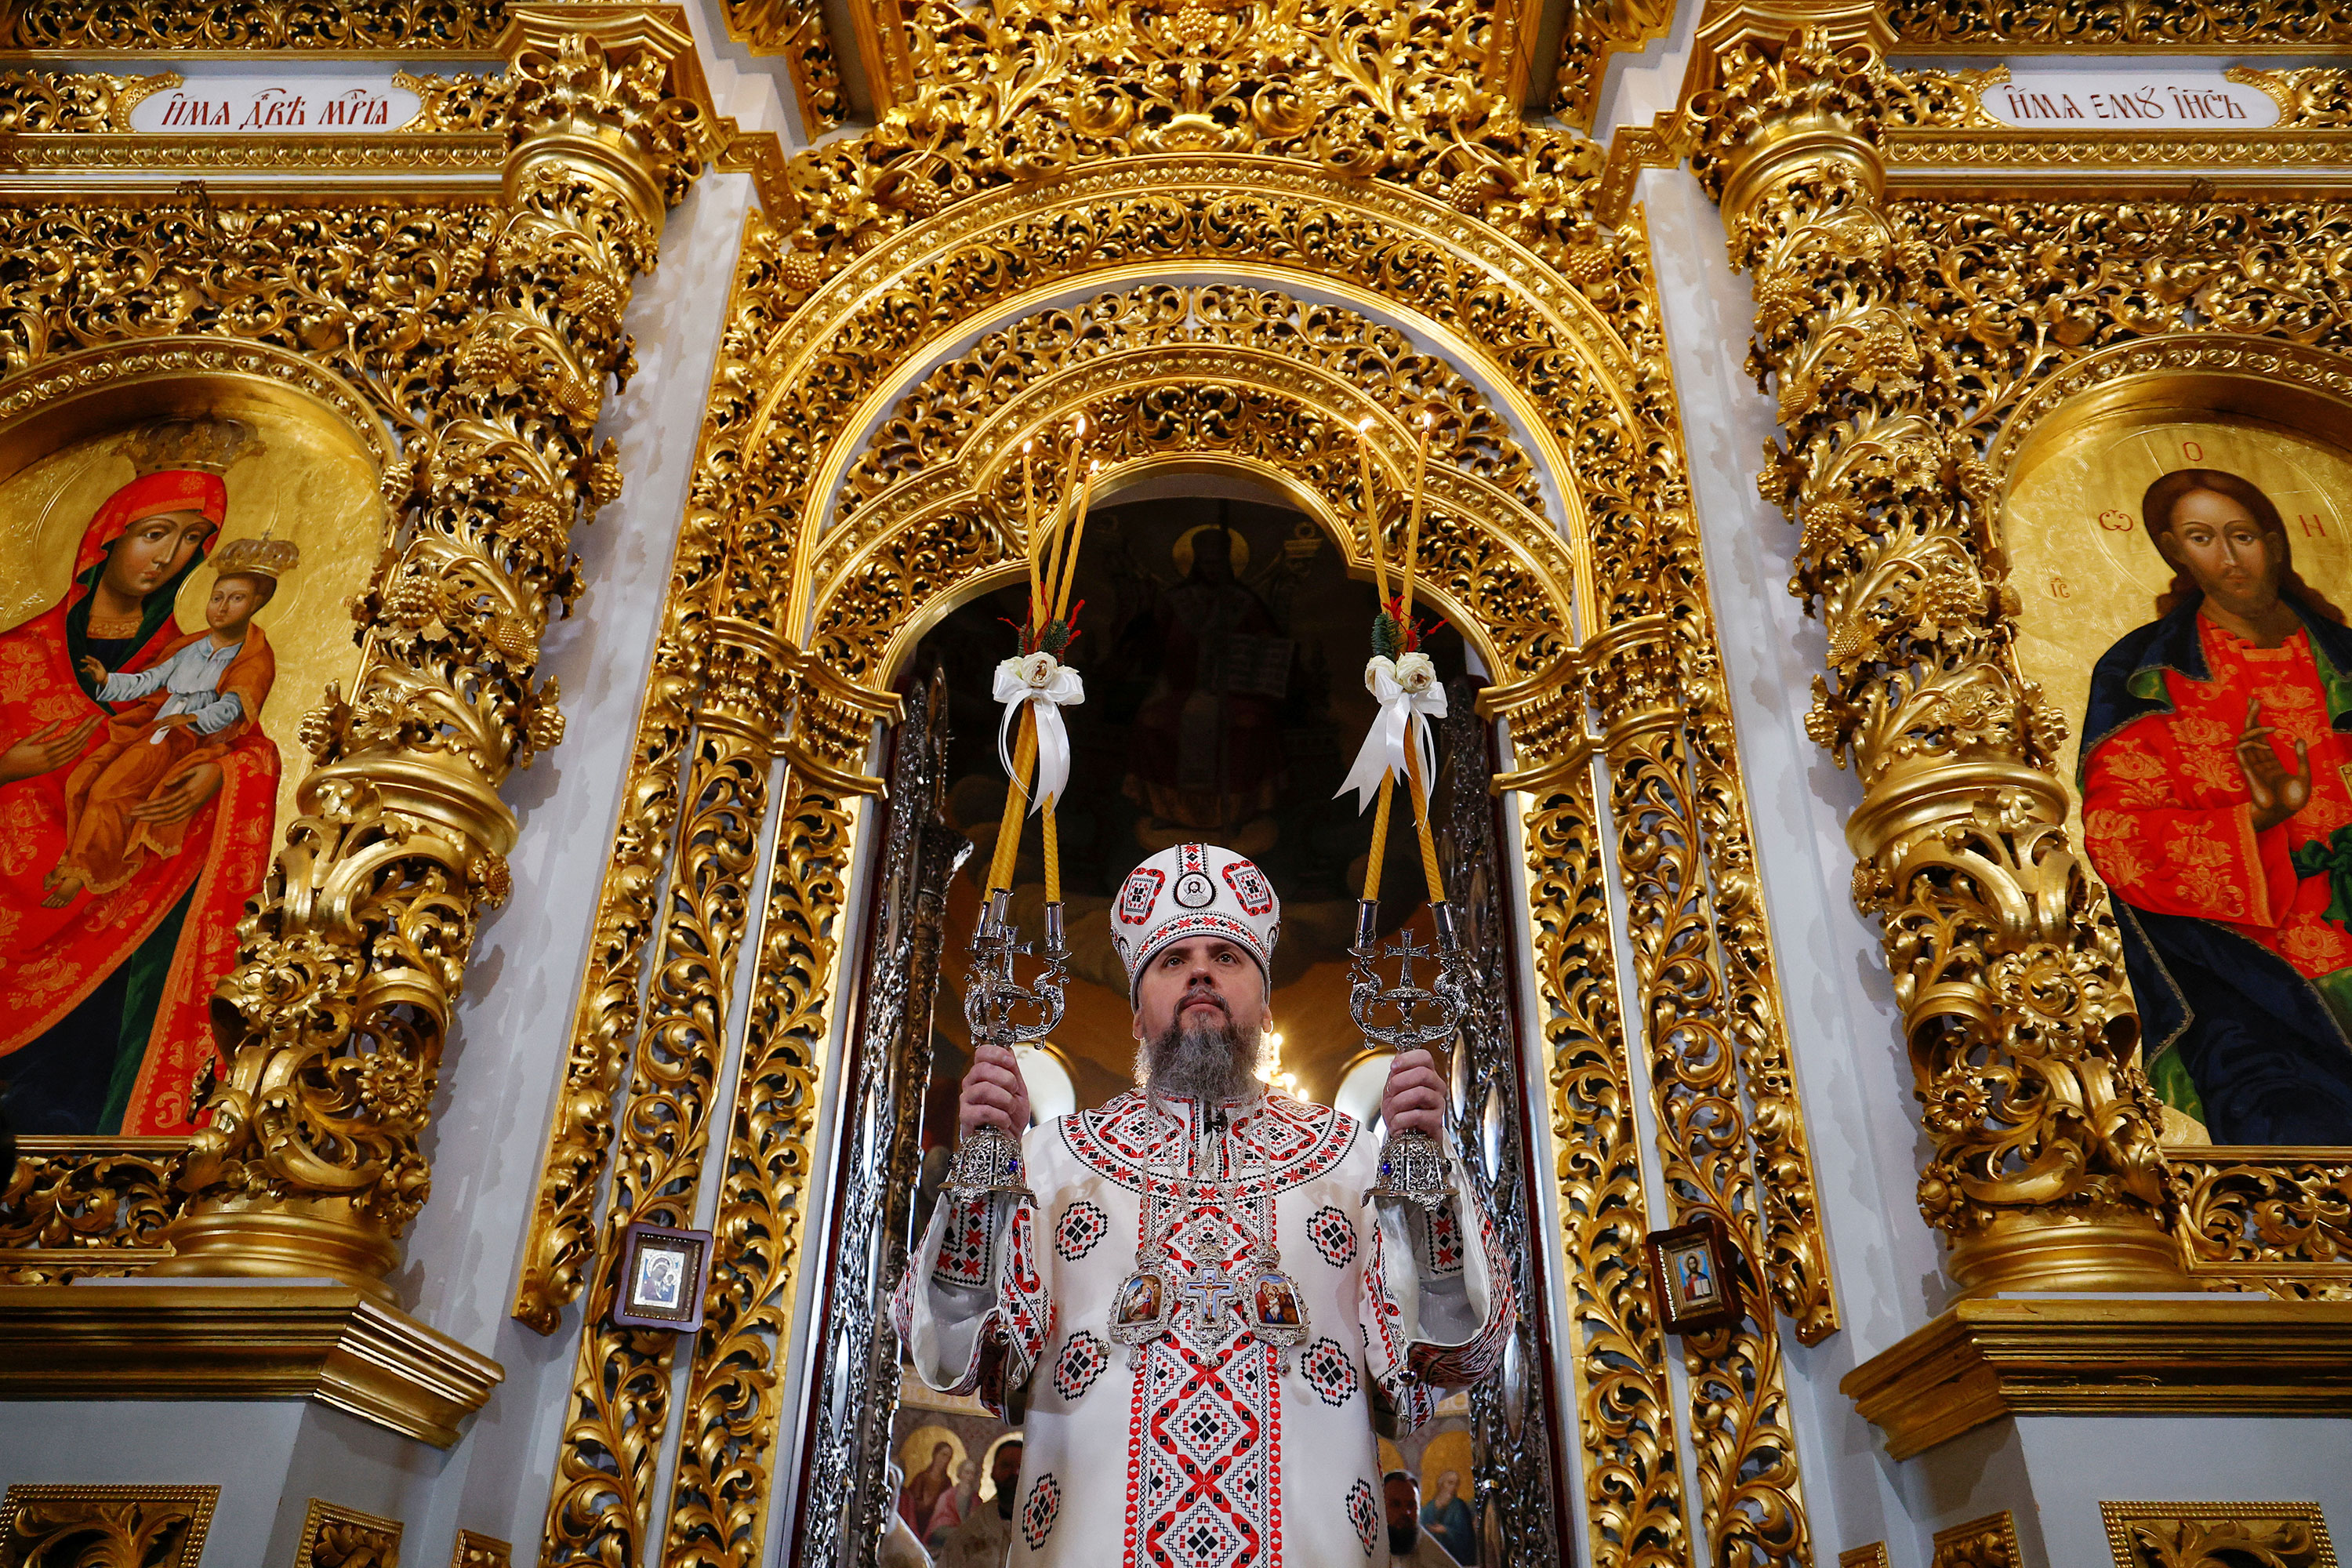 Metropolitan Epiphanius I, head of the Orthodox Church of Ukraine, leads a Christmas service inside the Holy Dormition Cathedral for the first time Saturday in Kyiv. The cathedral is part of the Kyiv-Pechersk Lavra monastery, which was under the control of the Russian-aligned Ukrainian Orthodox Church for decades. 